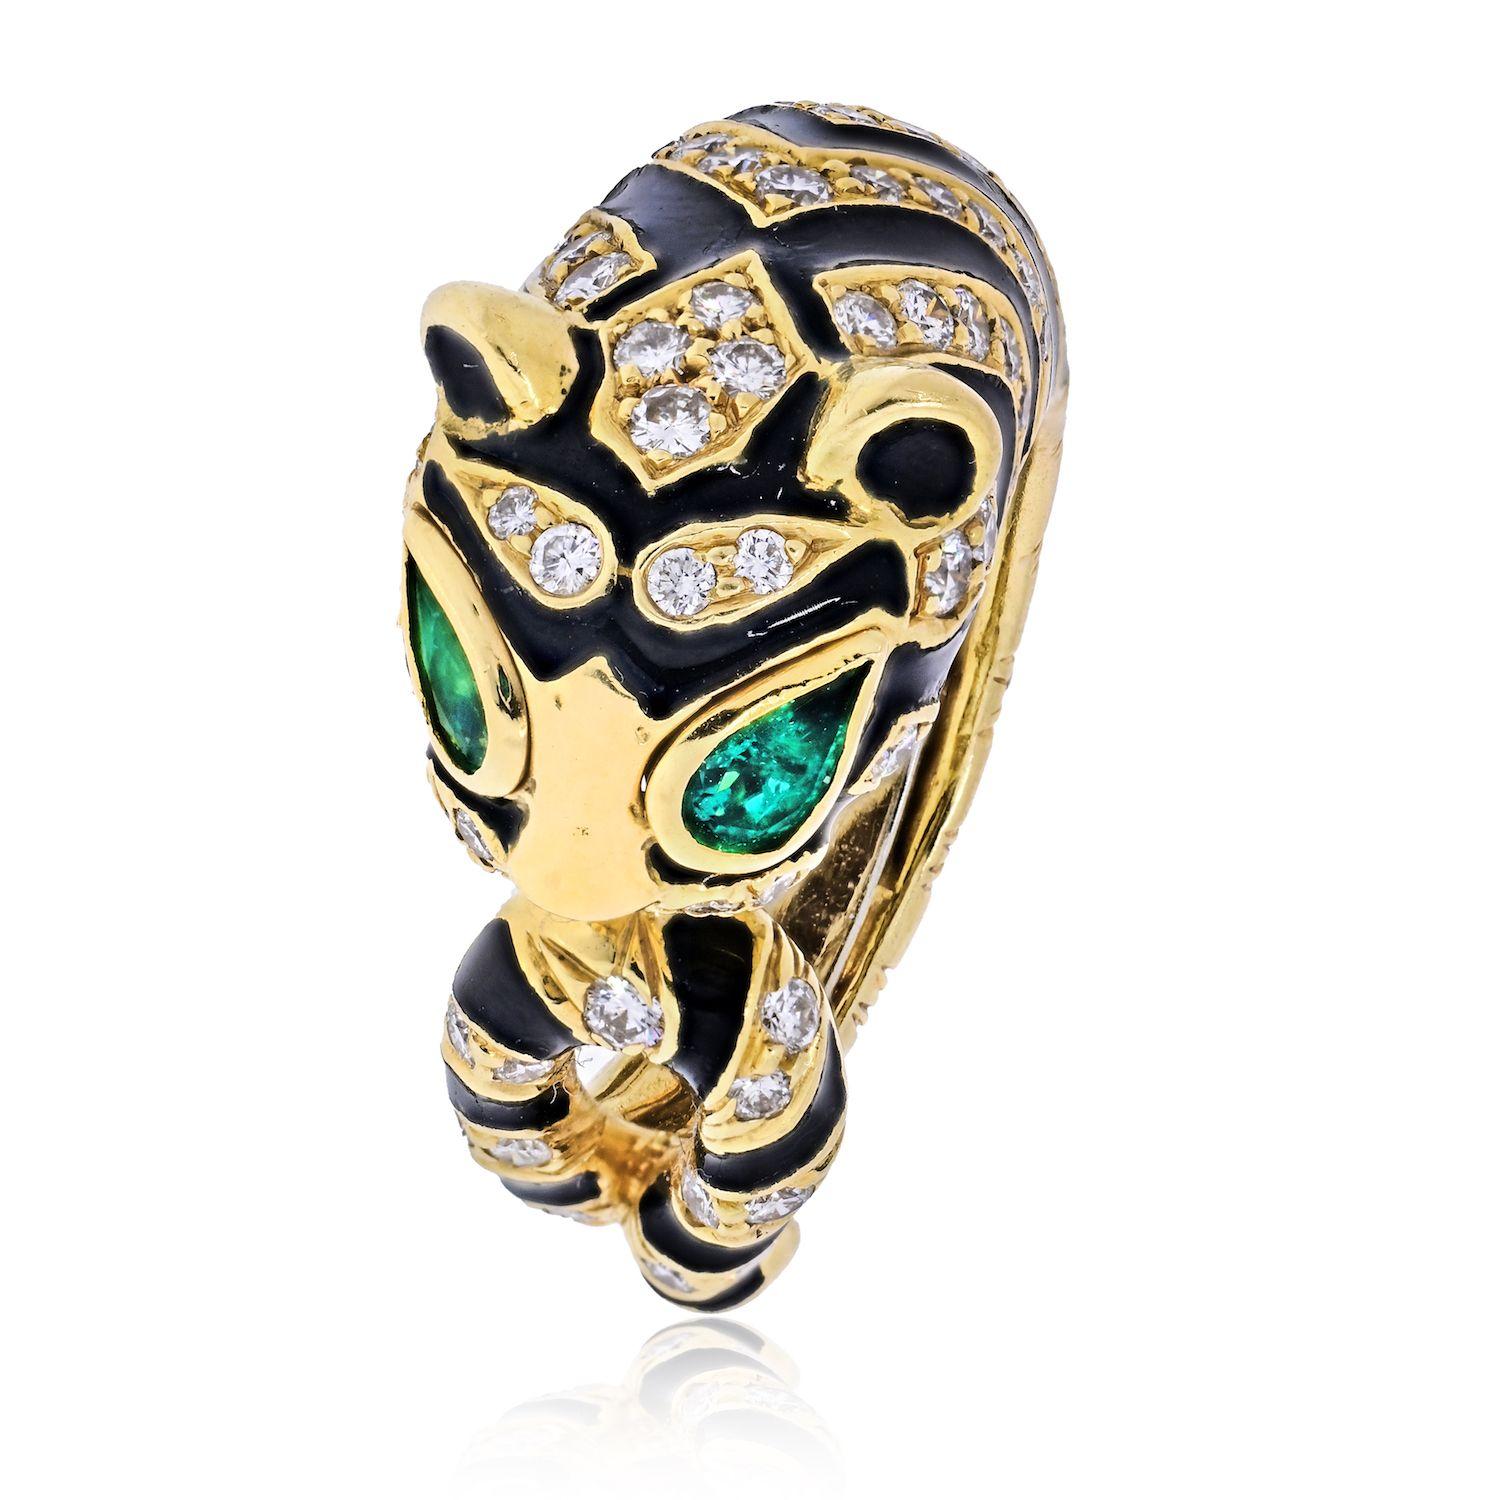 This stunning ring by David Webb crafted as the coiled tiger with looped tail. There are an estimated 1.80ctw F-G/VS in round brilliant cut diamonds and two pear cut emeralds. It measures 12mm wide above the finger and 5mm below. The ring is in very